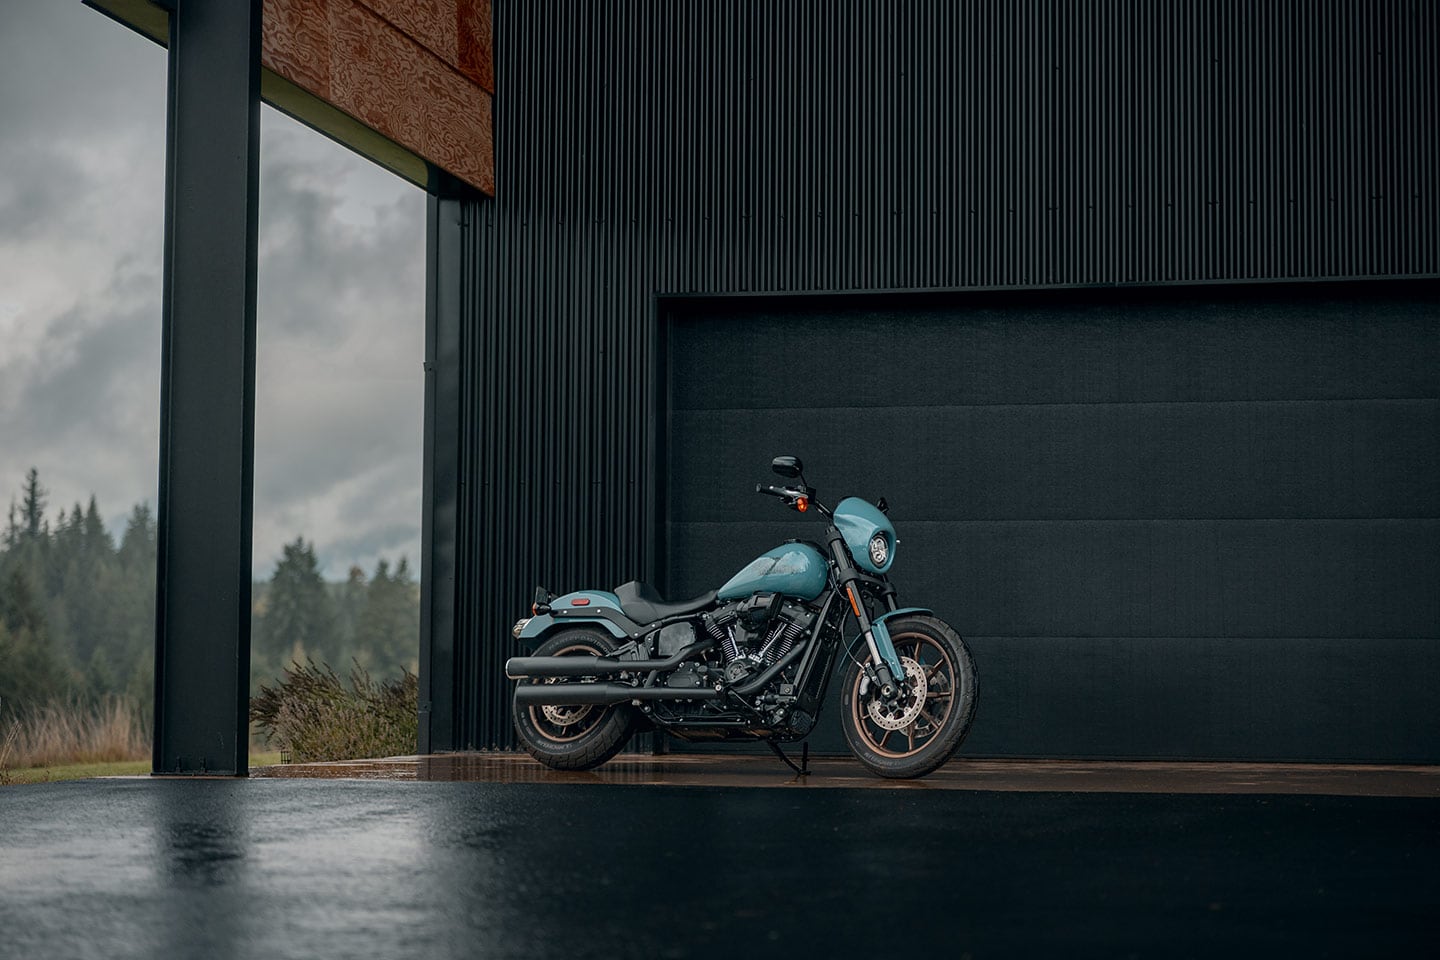 The Low Rider S is equipped with ABS, traction control, and dual front discs.